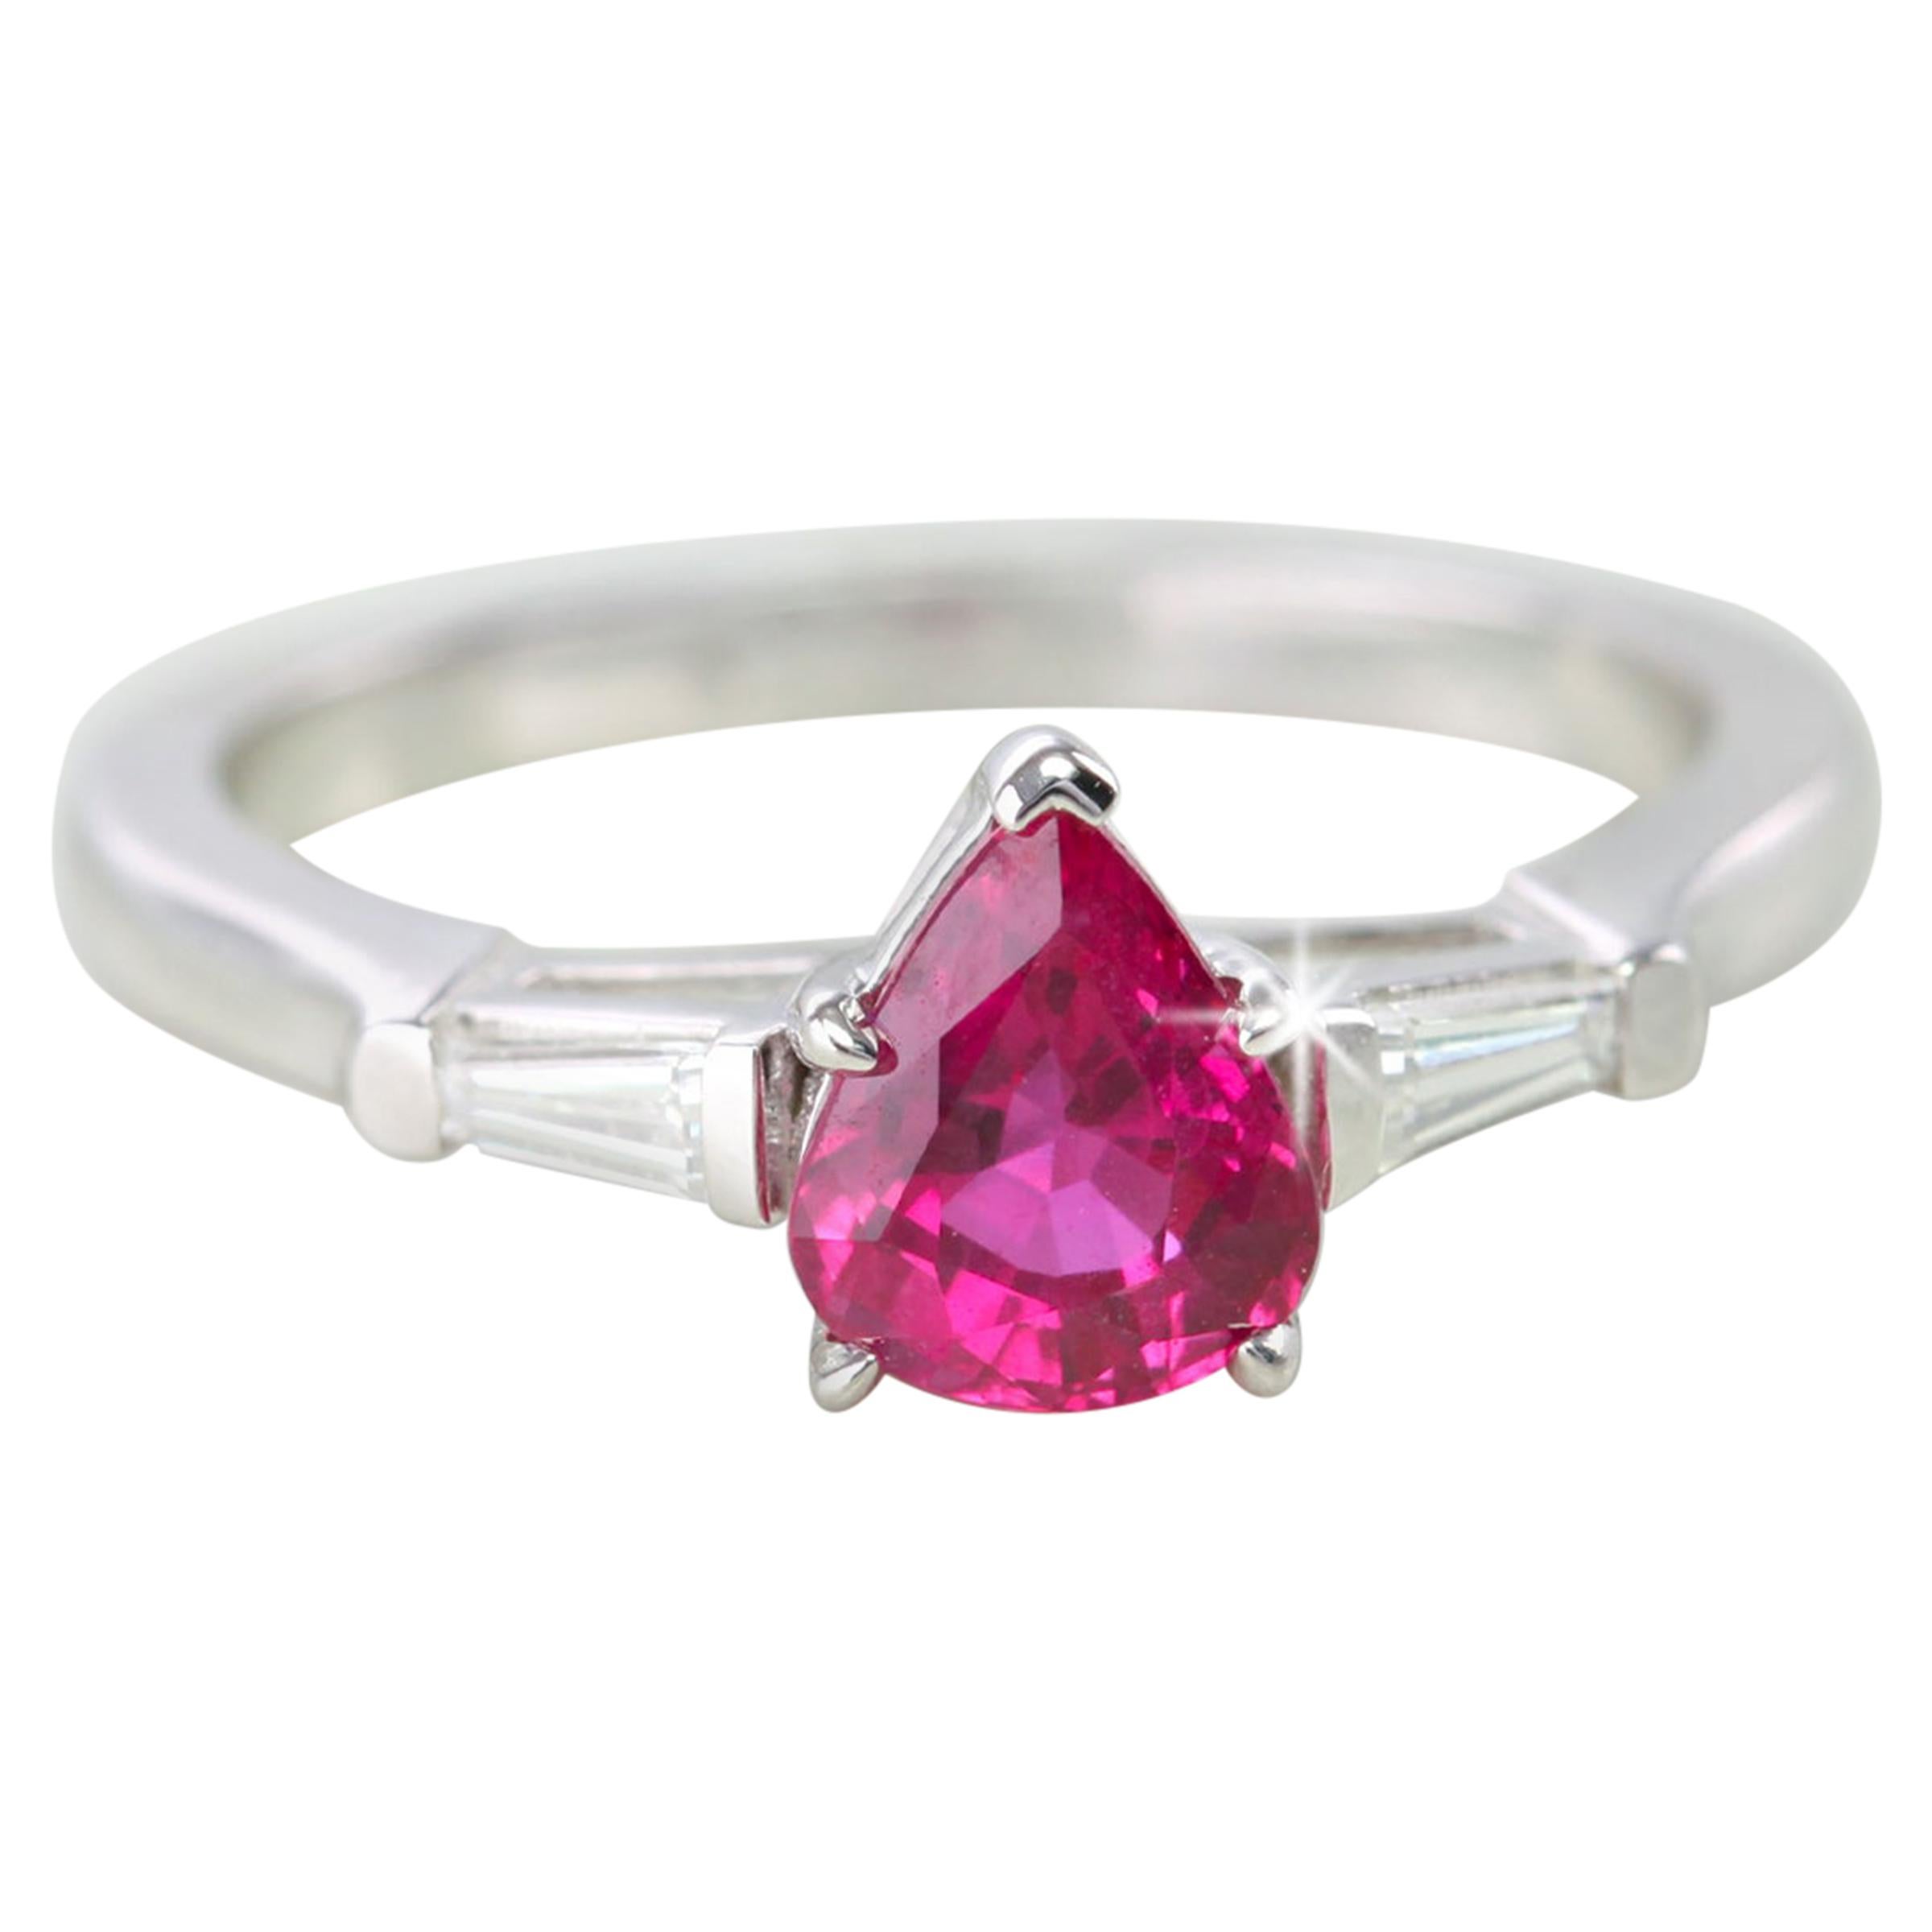 14 Karat White Gold Pear Shaped Ruby with Baguette Diamonds Ring